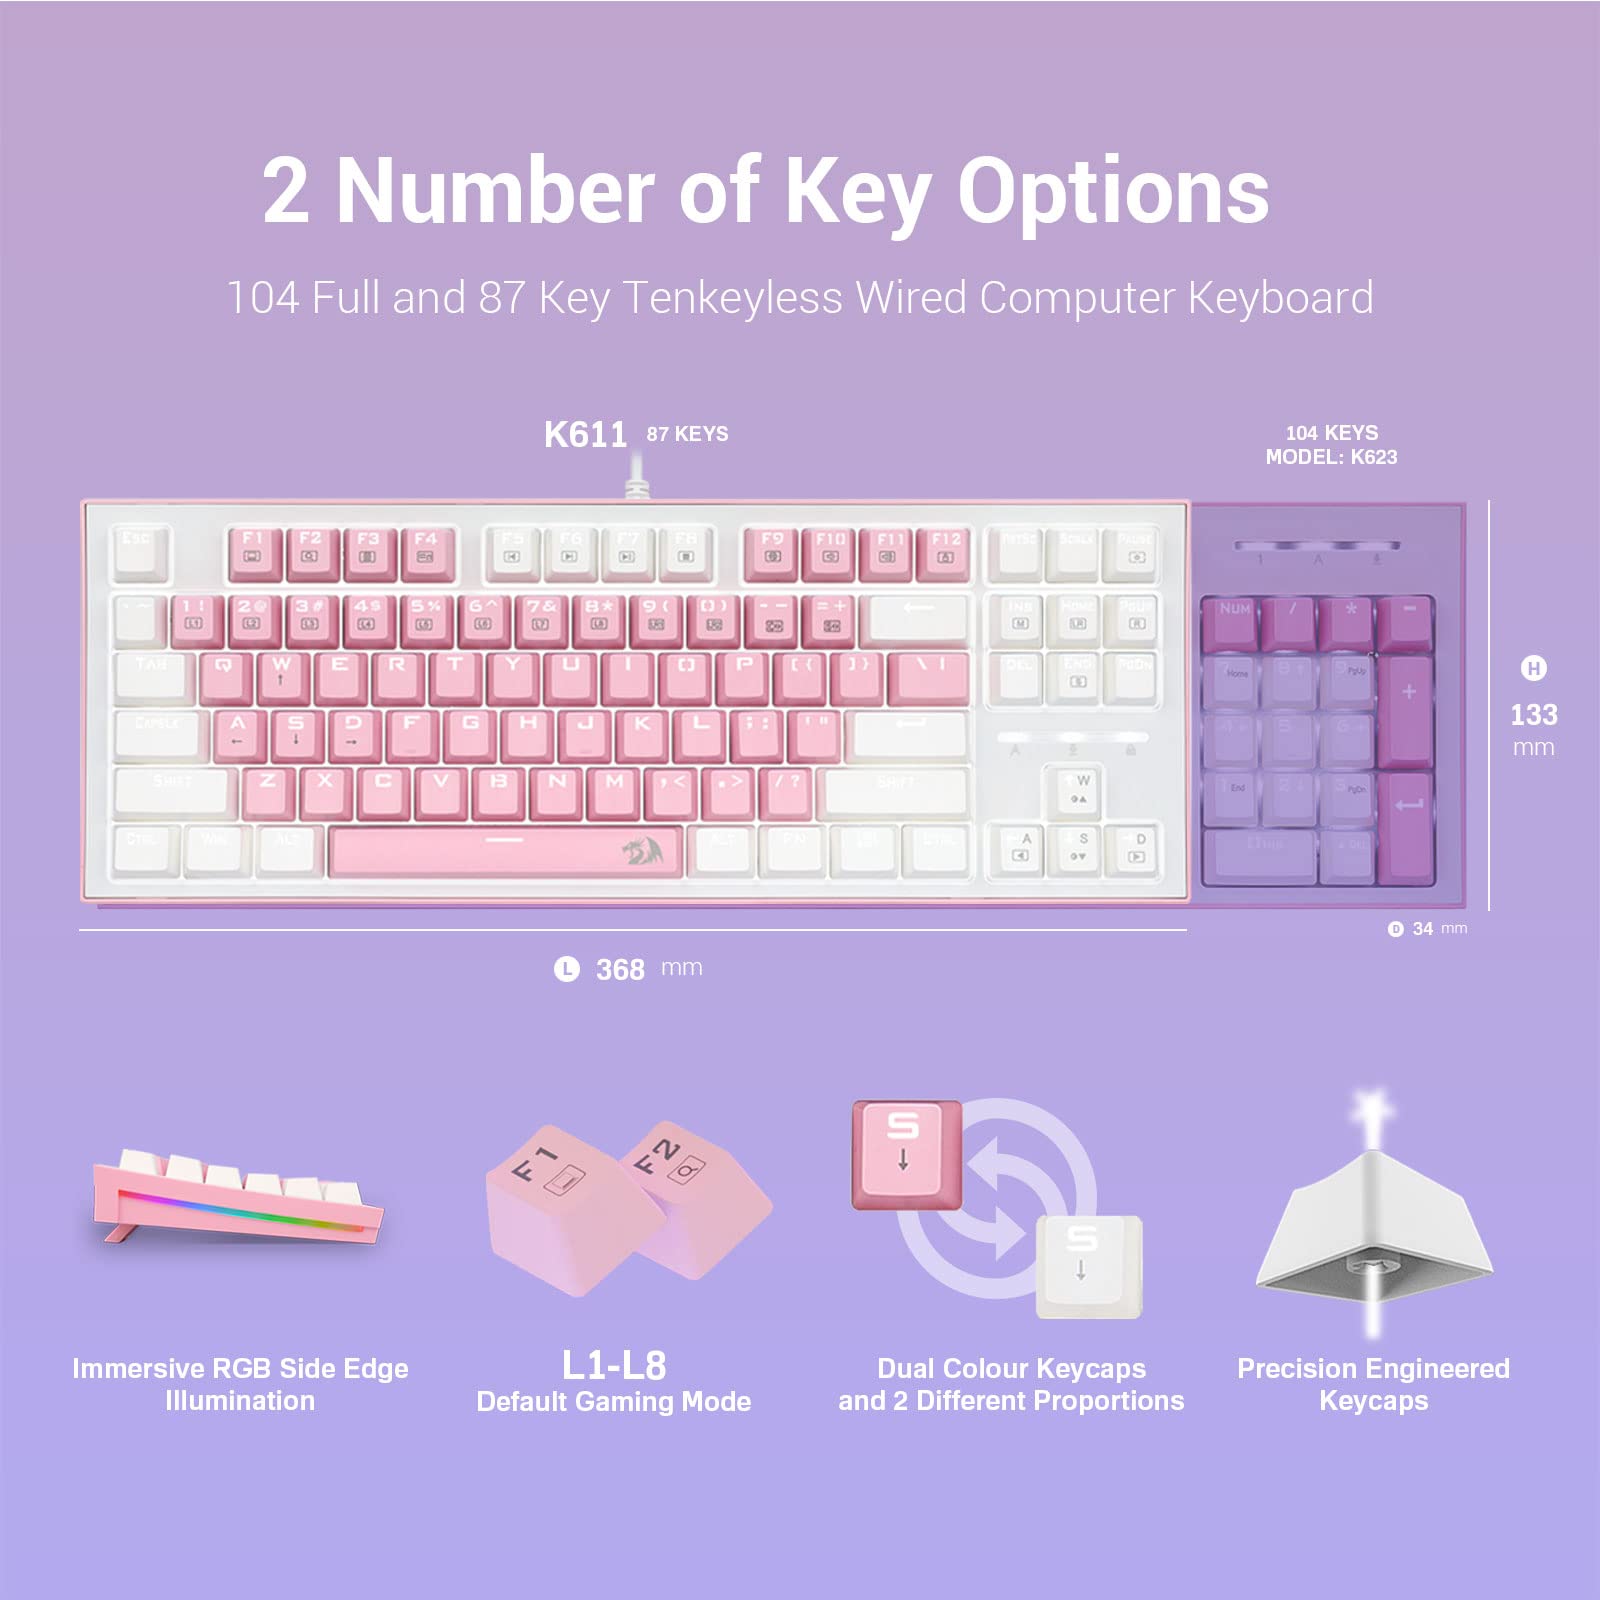 Redragon K611 Dual Color Keys Mechanical Gaming Keyboard Single White LED + RGB Side Edge Backlit 87 Key Tenkeyless Wired Computer Keyboard with Blue Switches for Windows PC (White + Pink)